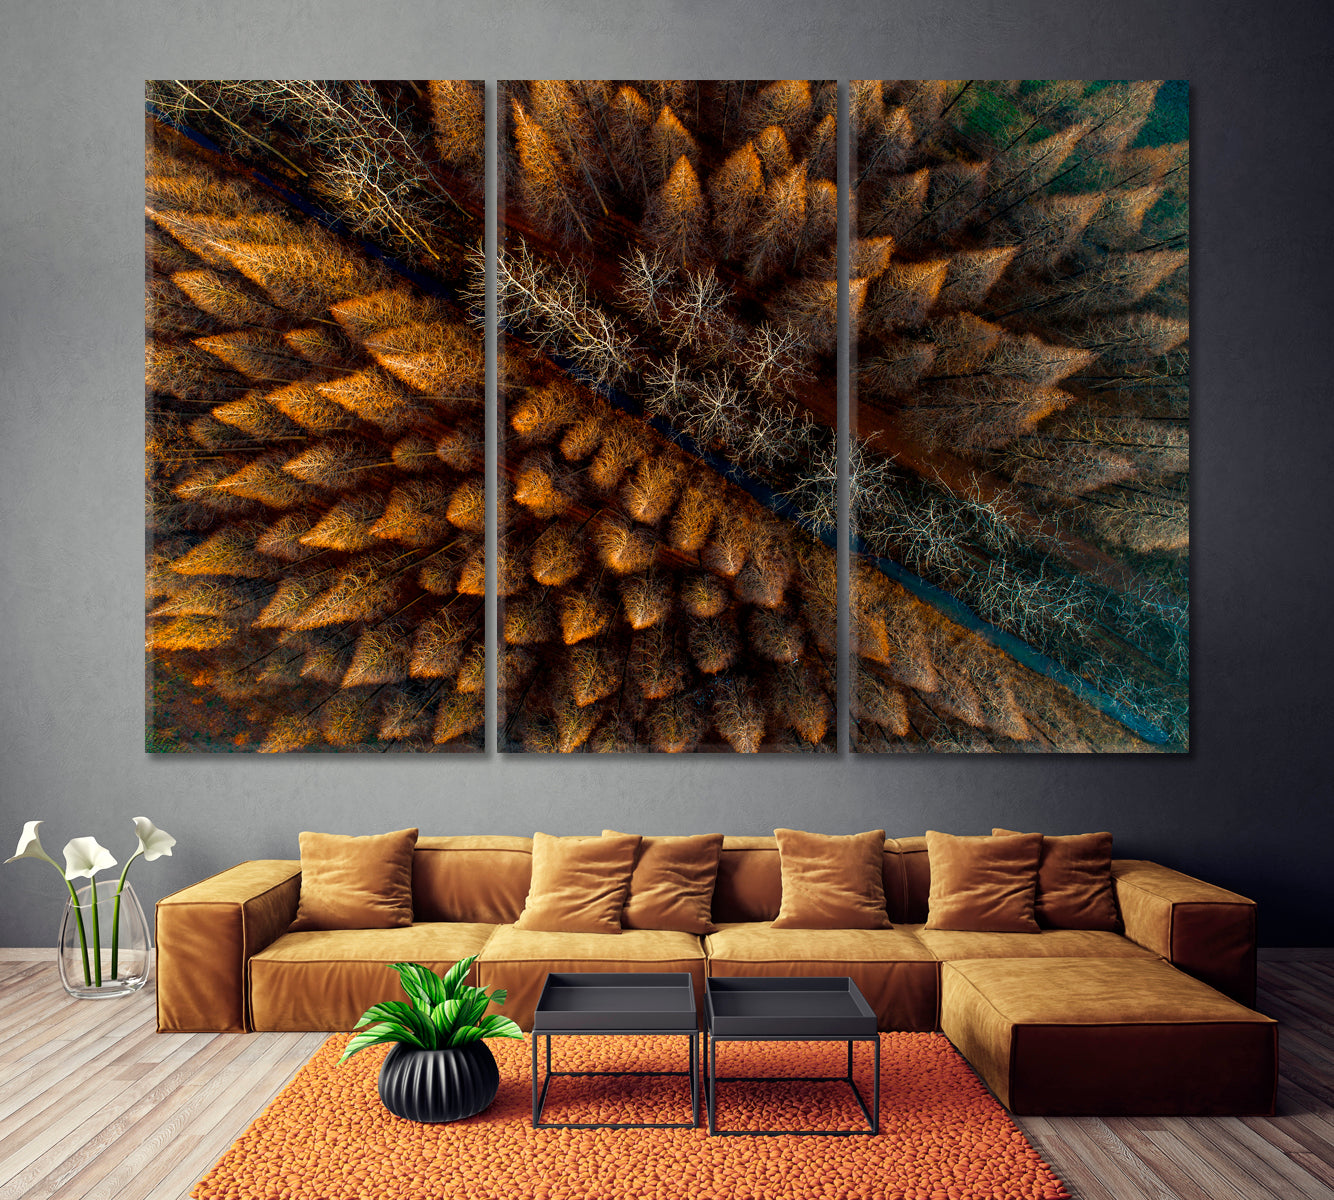 Metasequoia Forest Canvas Print ArtLexy 3 Panels 36"x24" inches 